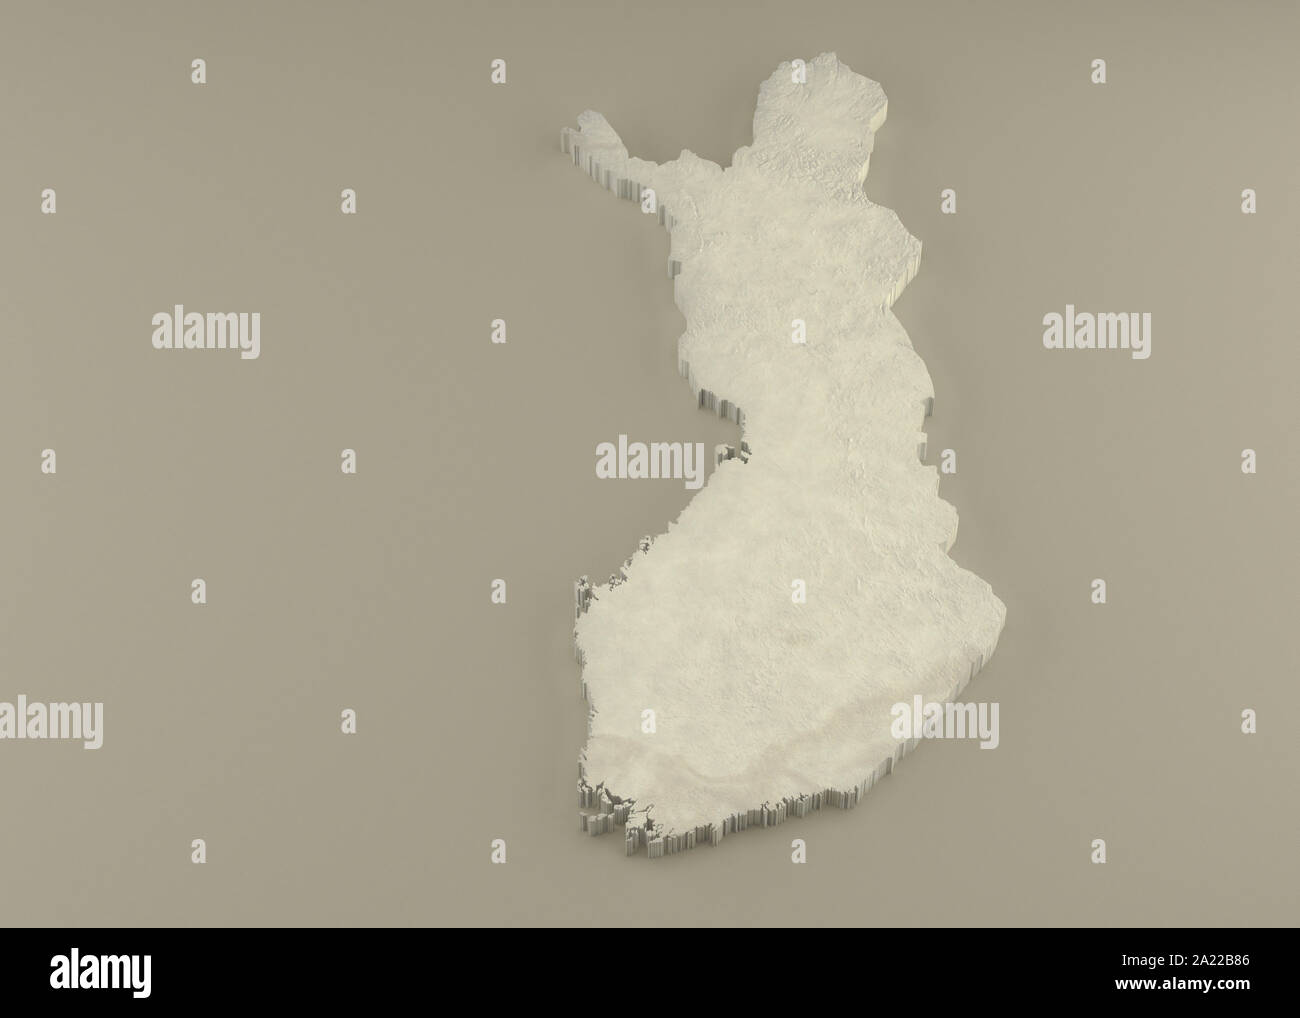 Extruded 3D political Map of Finland with relief as marble sculpture on a light beige background Stock Photo